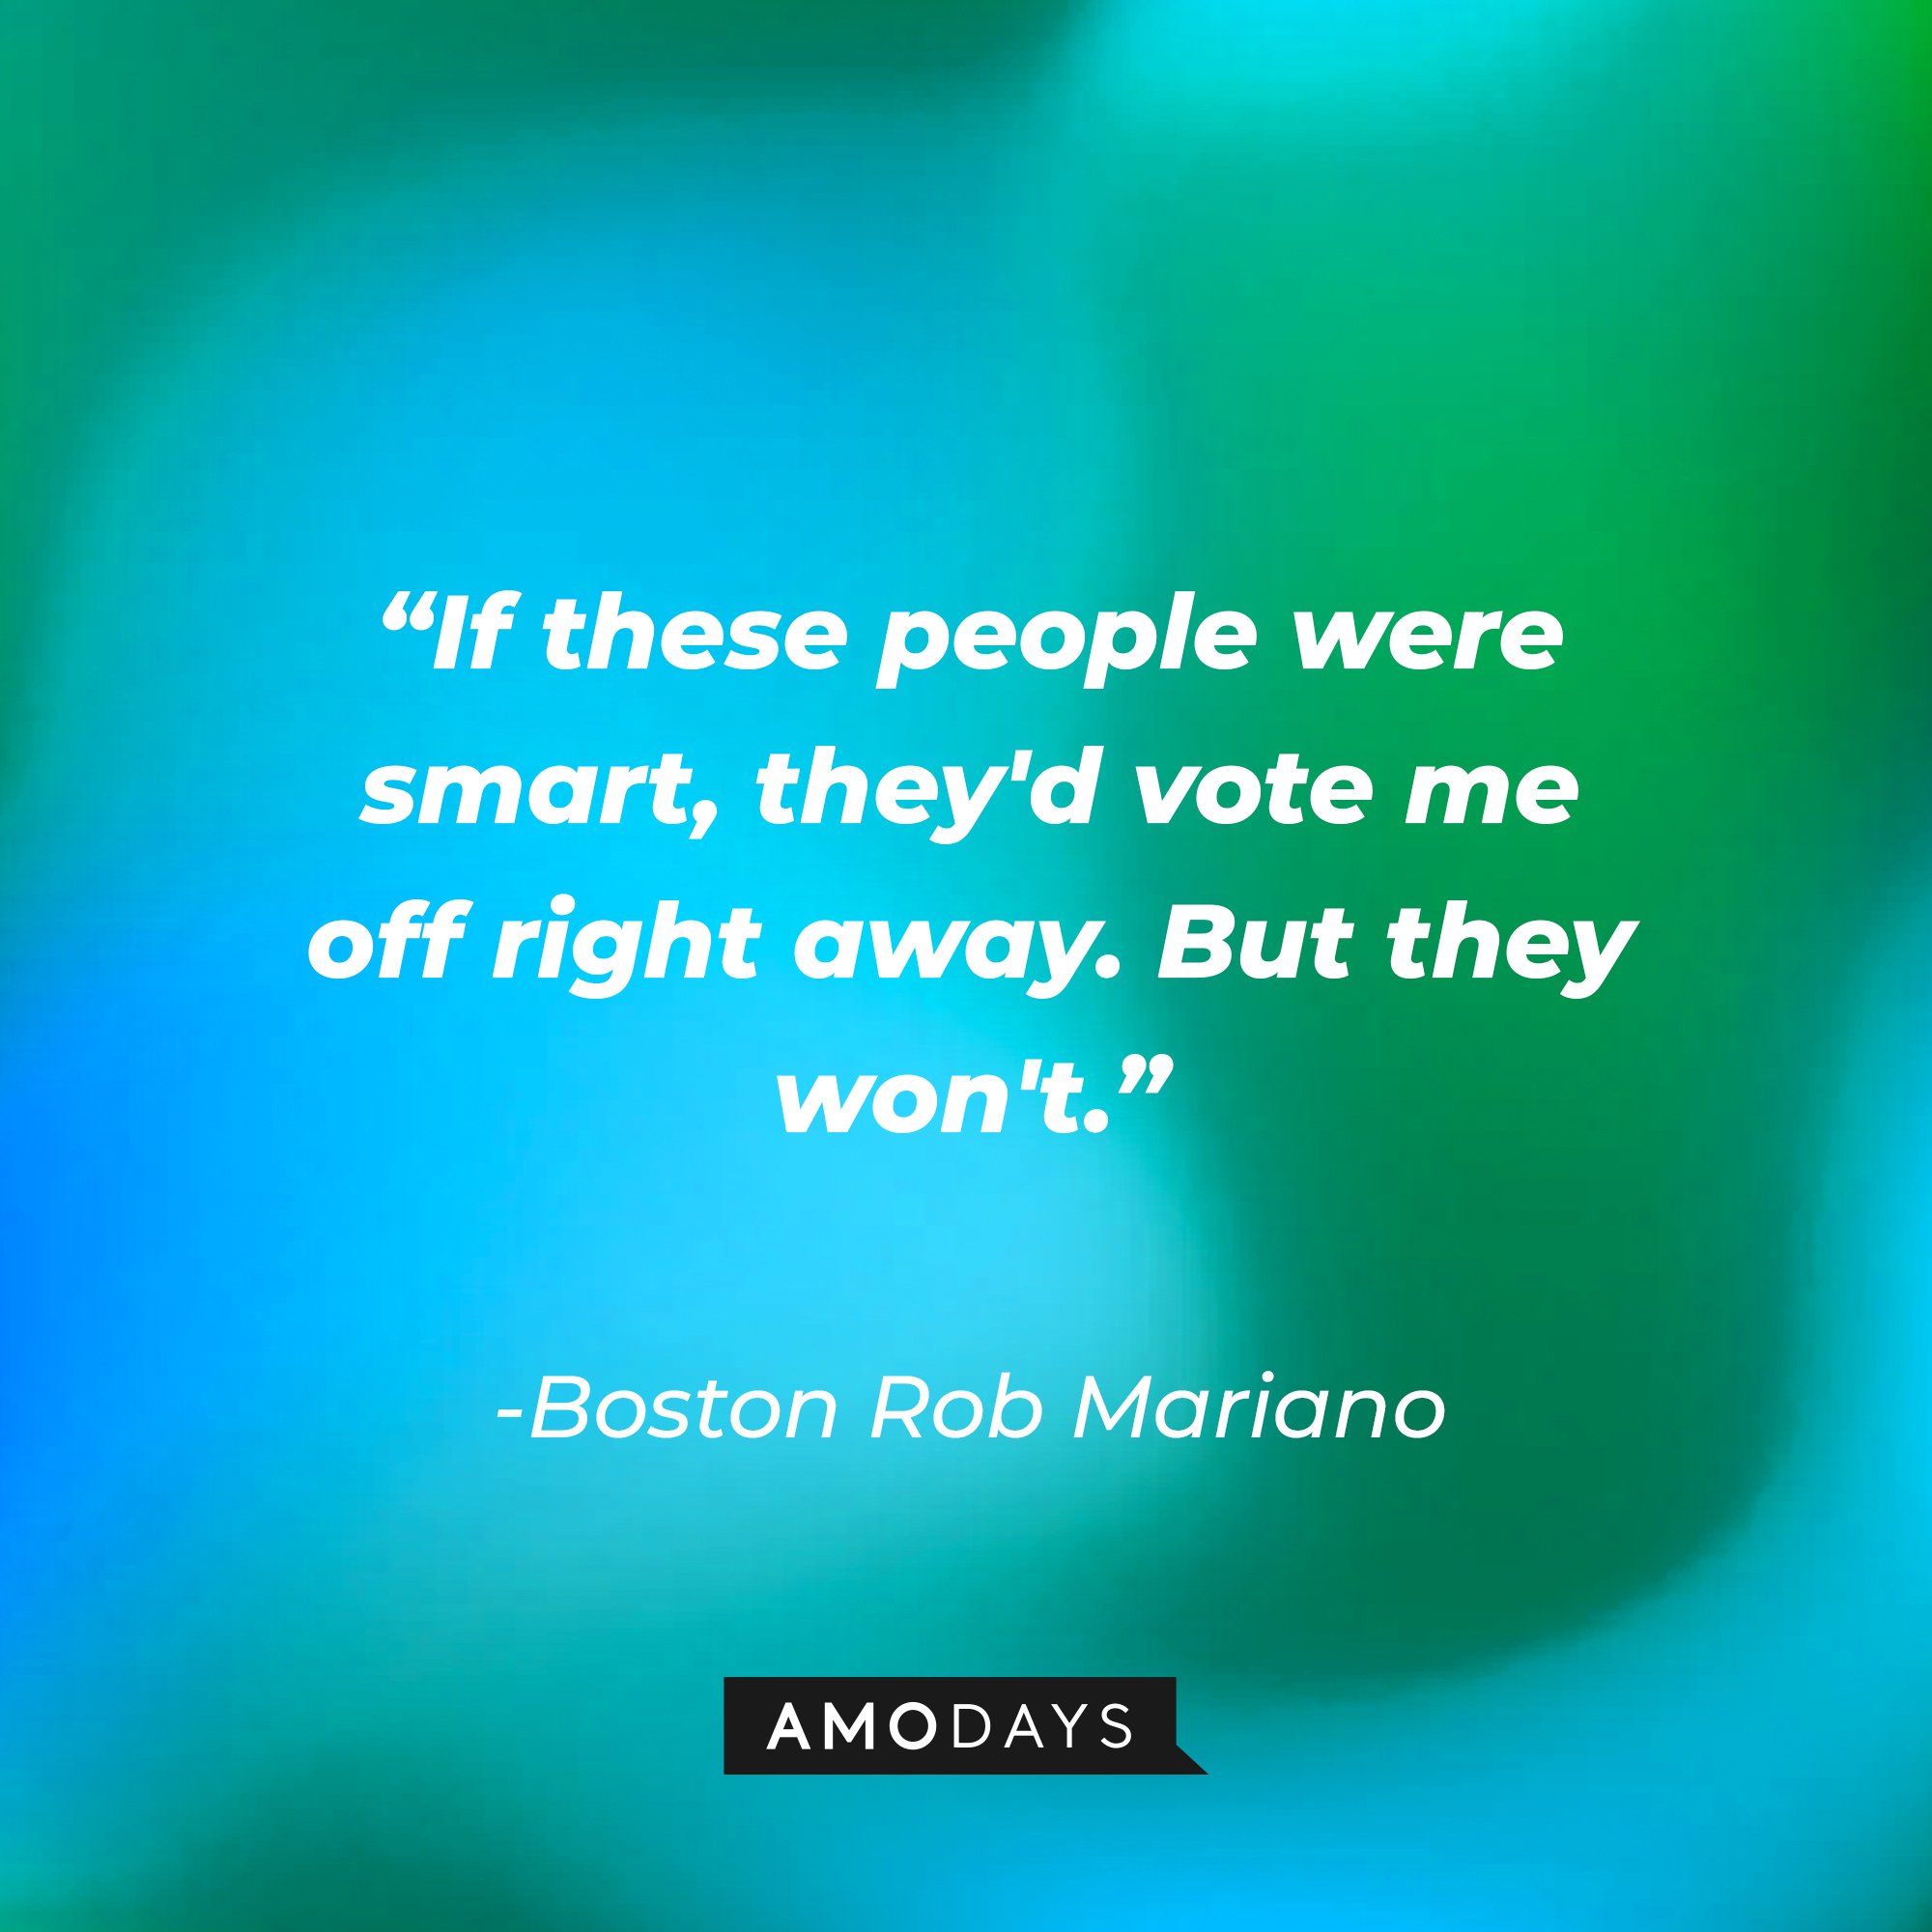 Boston Rob Mariano’s quote: "If these people were smart, they'd vote me off right away. But they won't.” │ Source: AmoDays